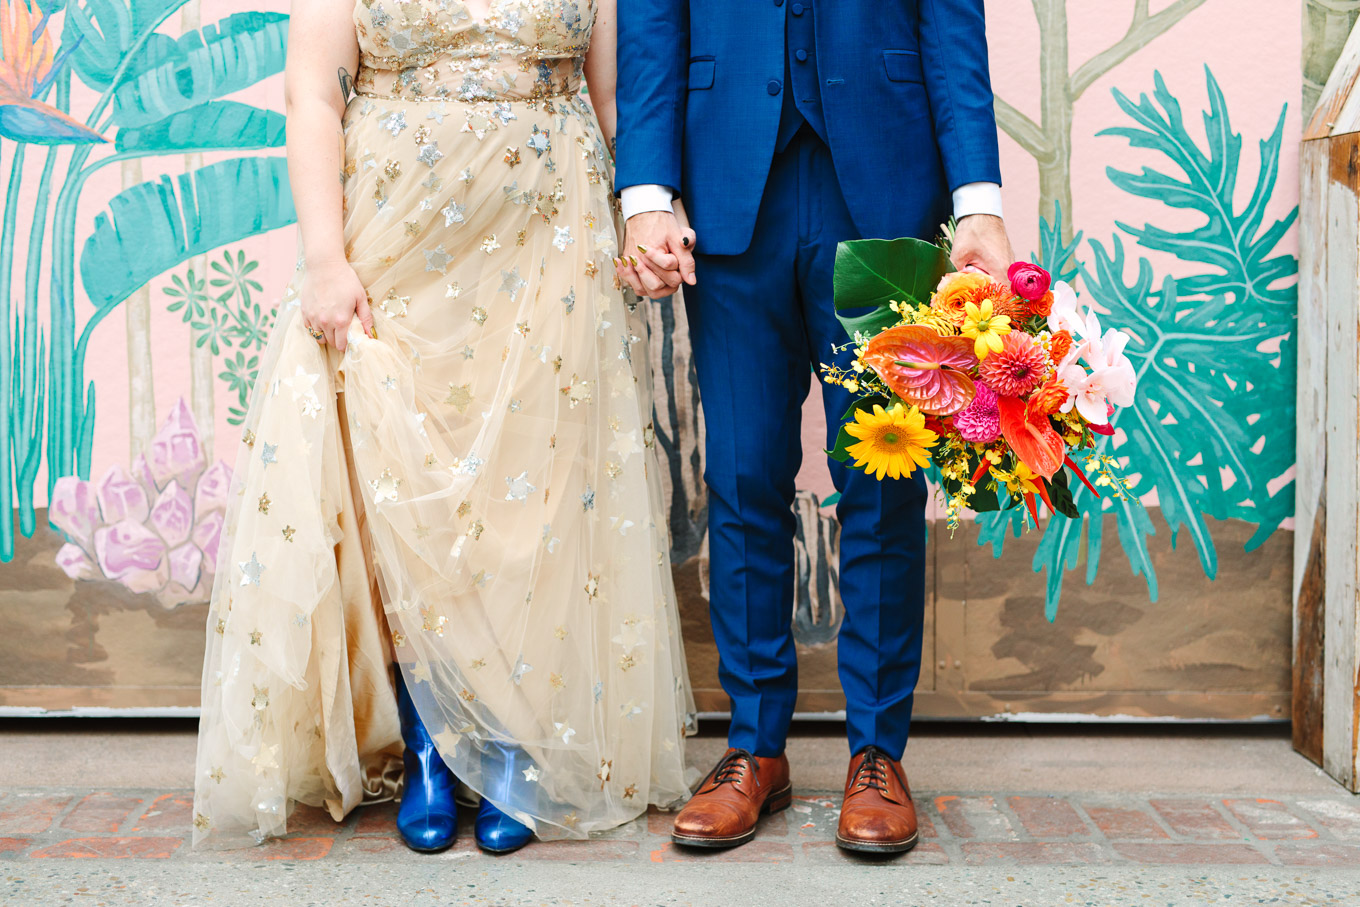 Bride with bright blue boots and groom holding bouquet in front of mural | Colorful Downtown Los Angeles Valentine Wedding | Los Angeles wedding photographer | #losangeleswedding #colorfulwedding #DTLA #valentinedtla   Source: Mary Costa Photography | Los Angeles